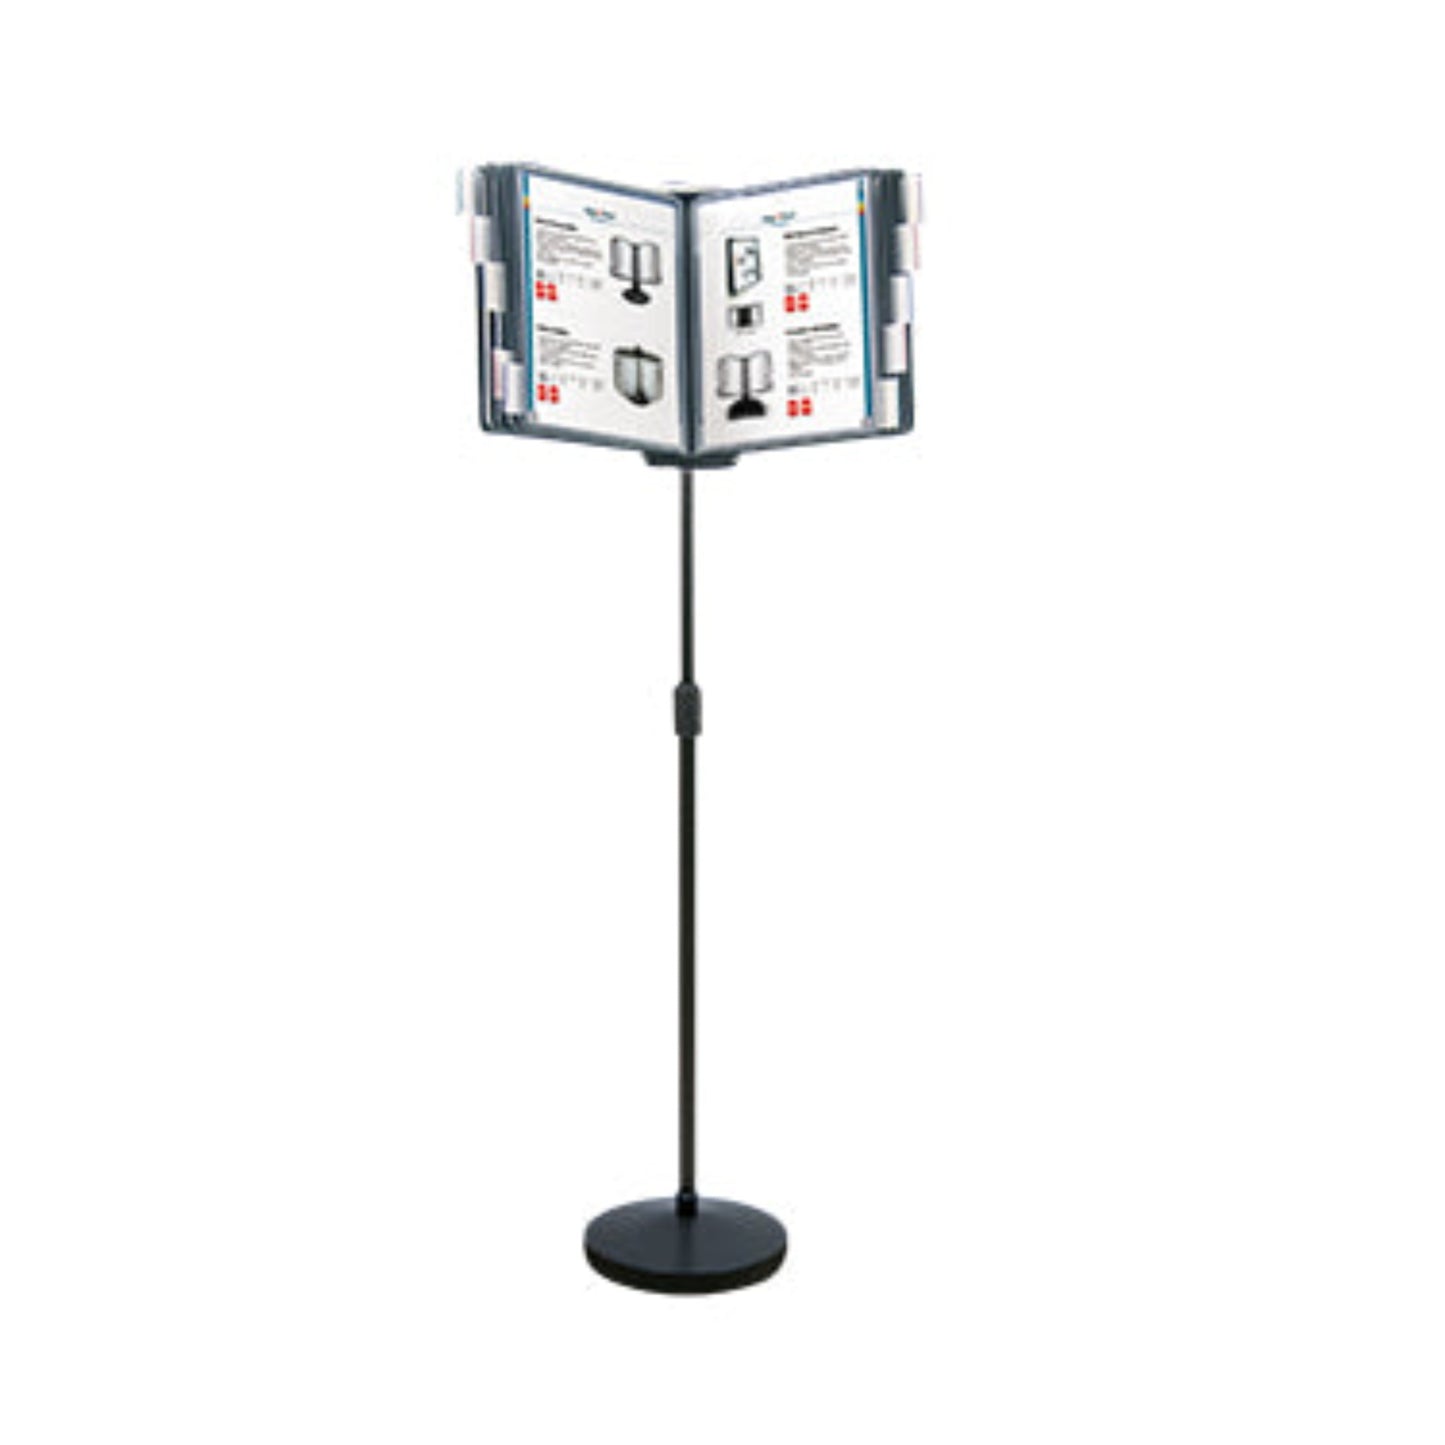 View-Adjust Floor Stand Reference Organizer (10 Panel)